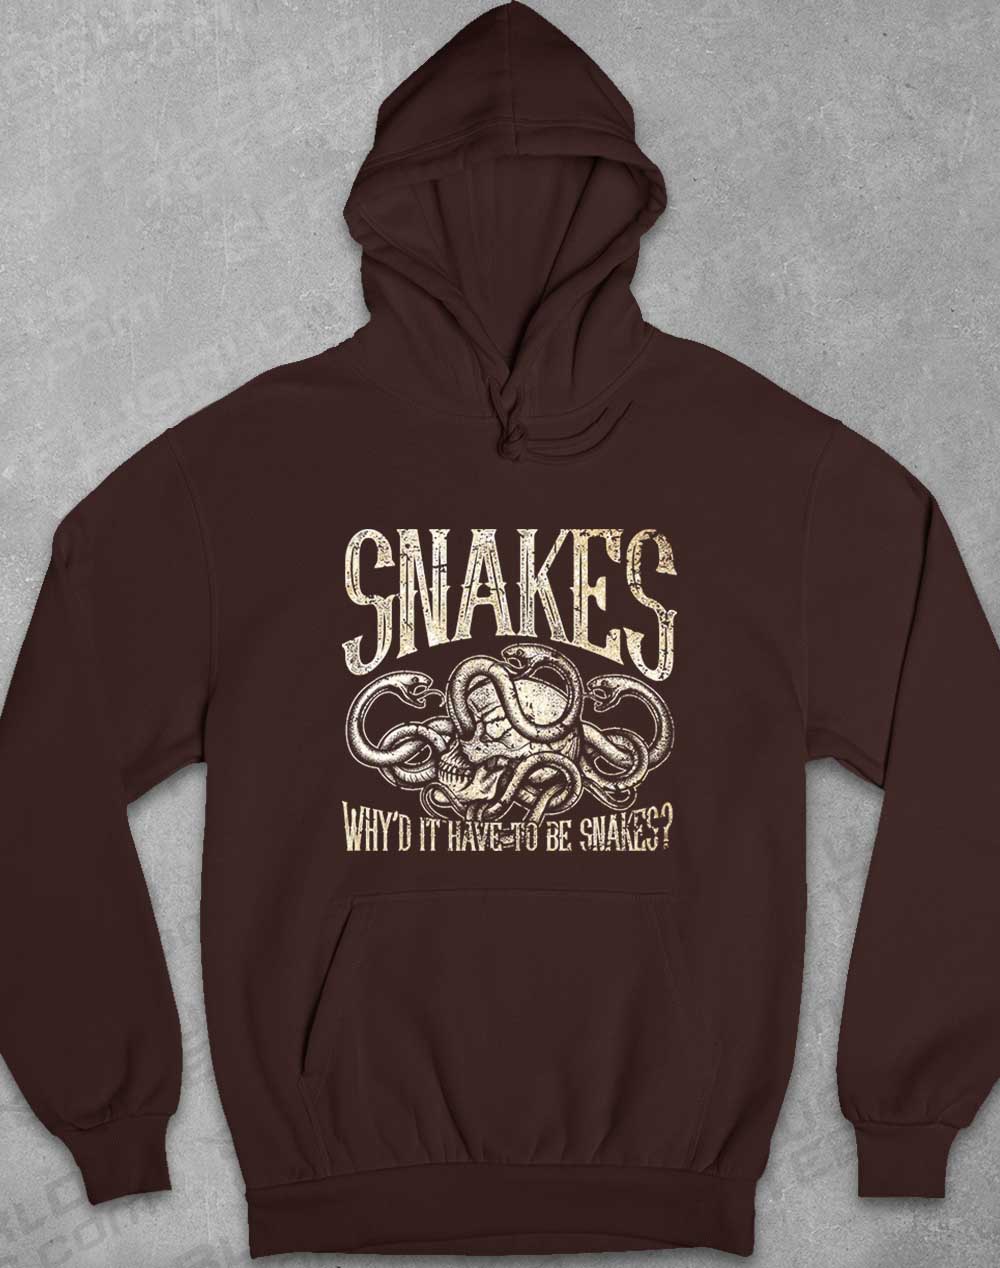 Hot Chocolate - Why'd it Have to be Snakes Hoodie